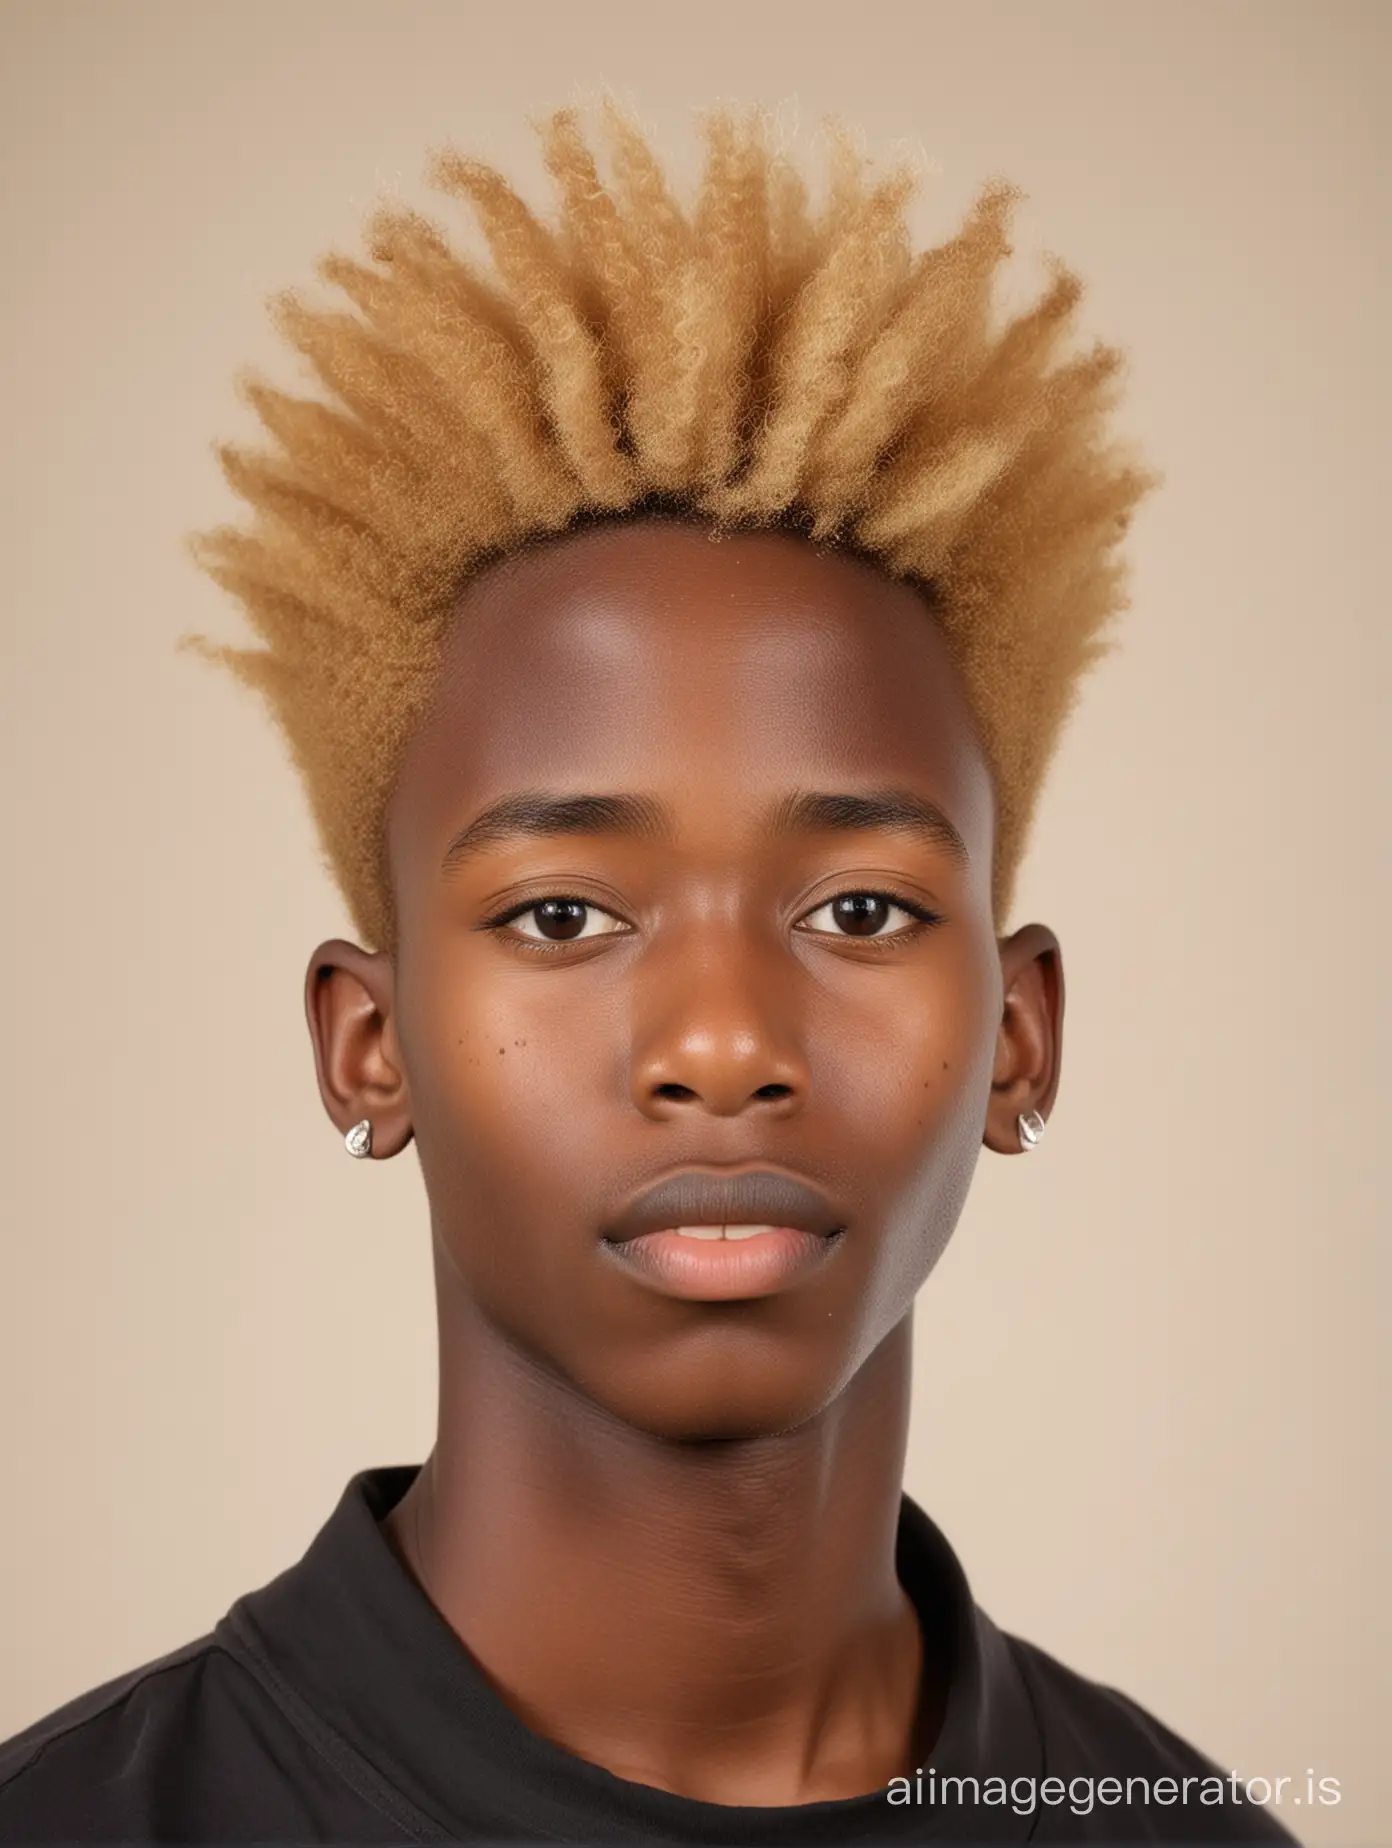 portrait of handsome ugandan teenage boy with blonde afro hair, large flat nose and pointy ears, plain light background